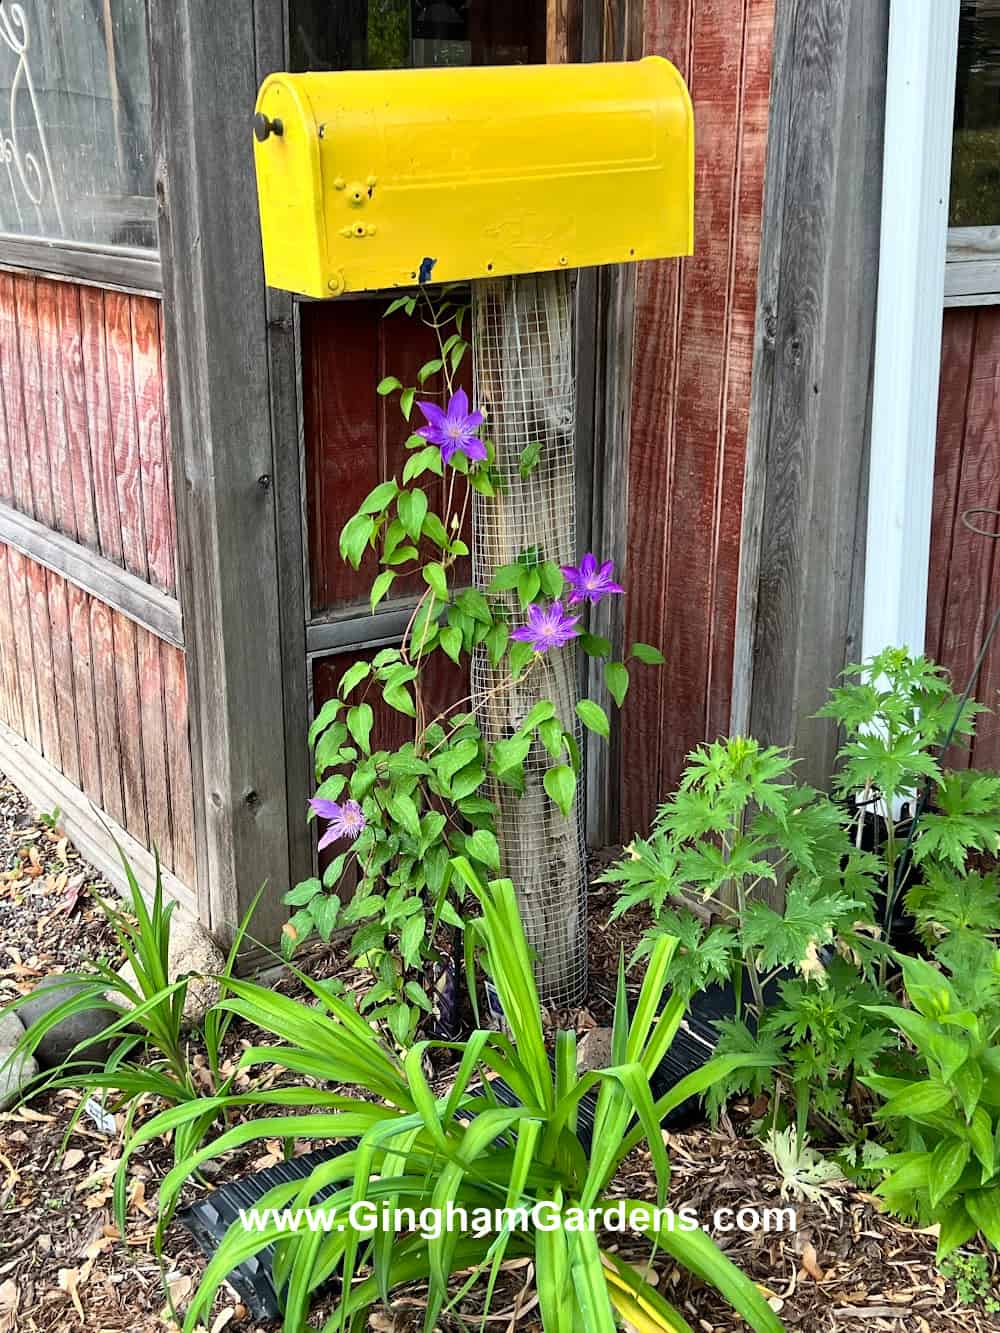 An old mailbox spray painted yellow in a flower garden.